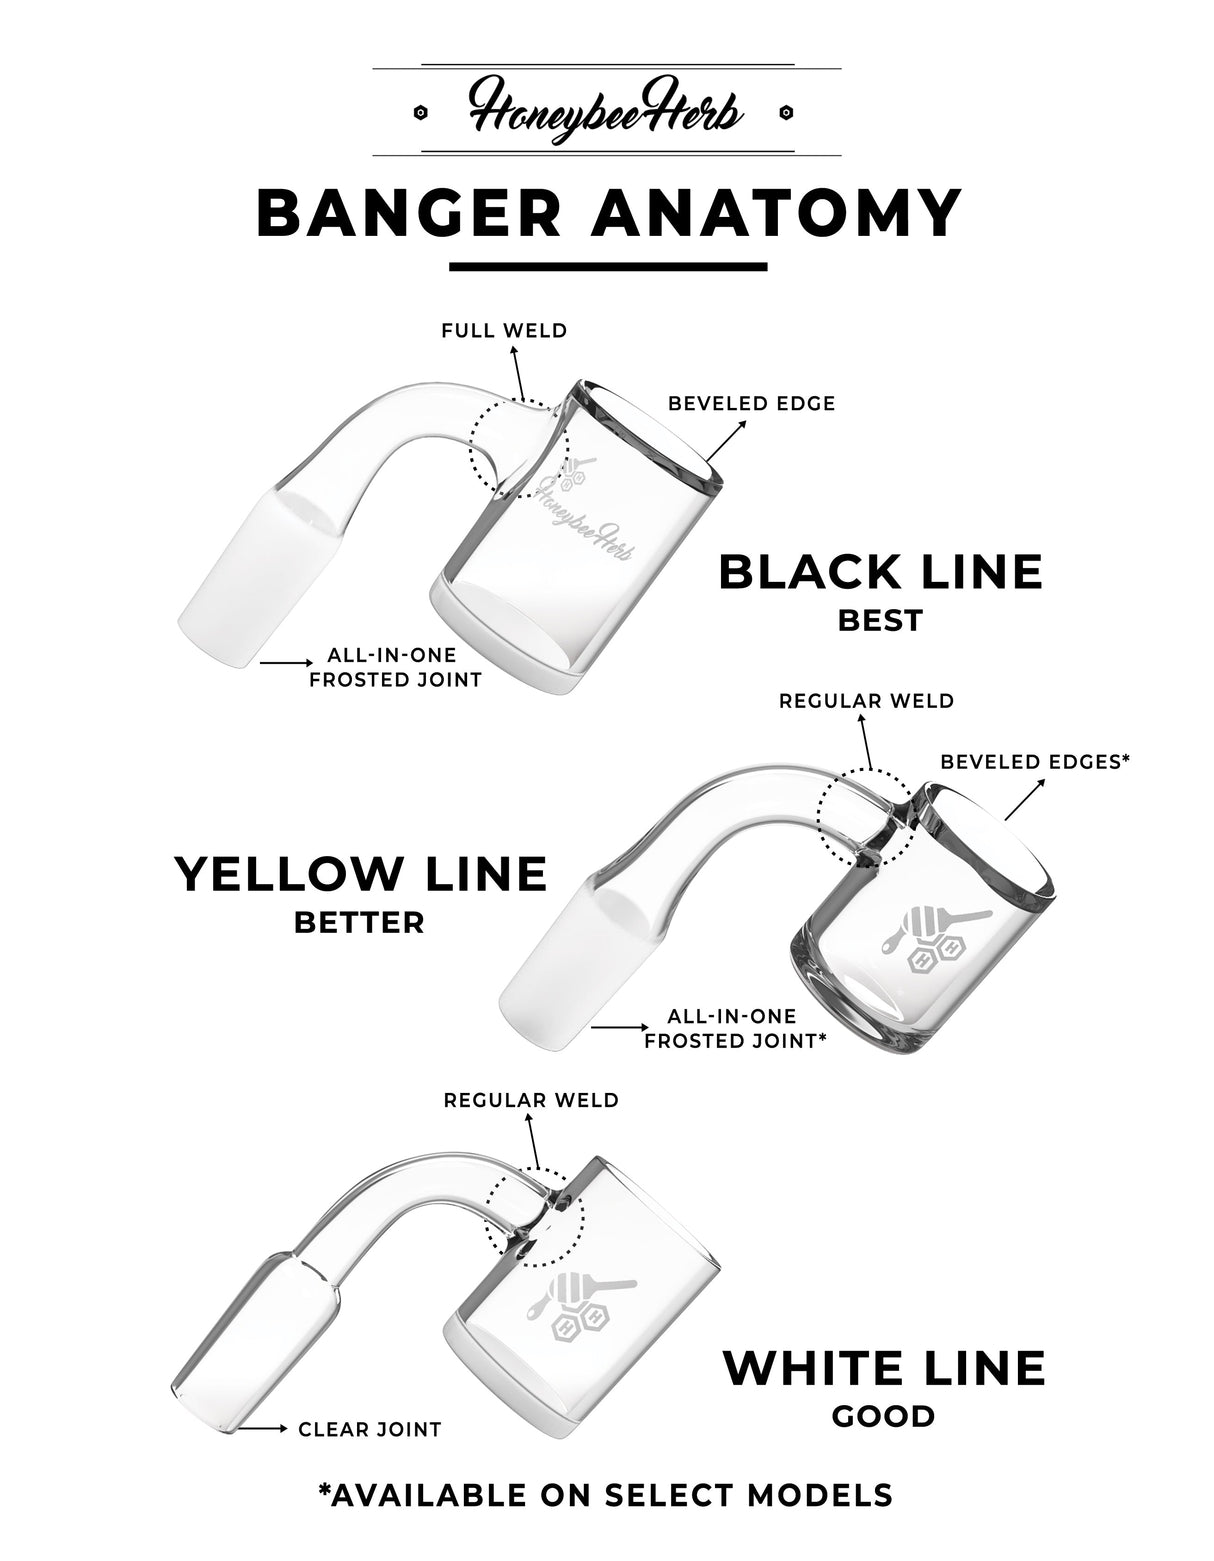 Honeybee Herb CLEAR BUCKET Banger Anatomy Diagram for Dab Rigs, showing weld and edge designs